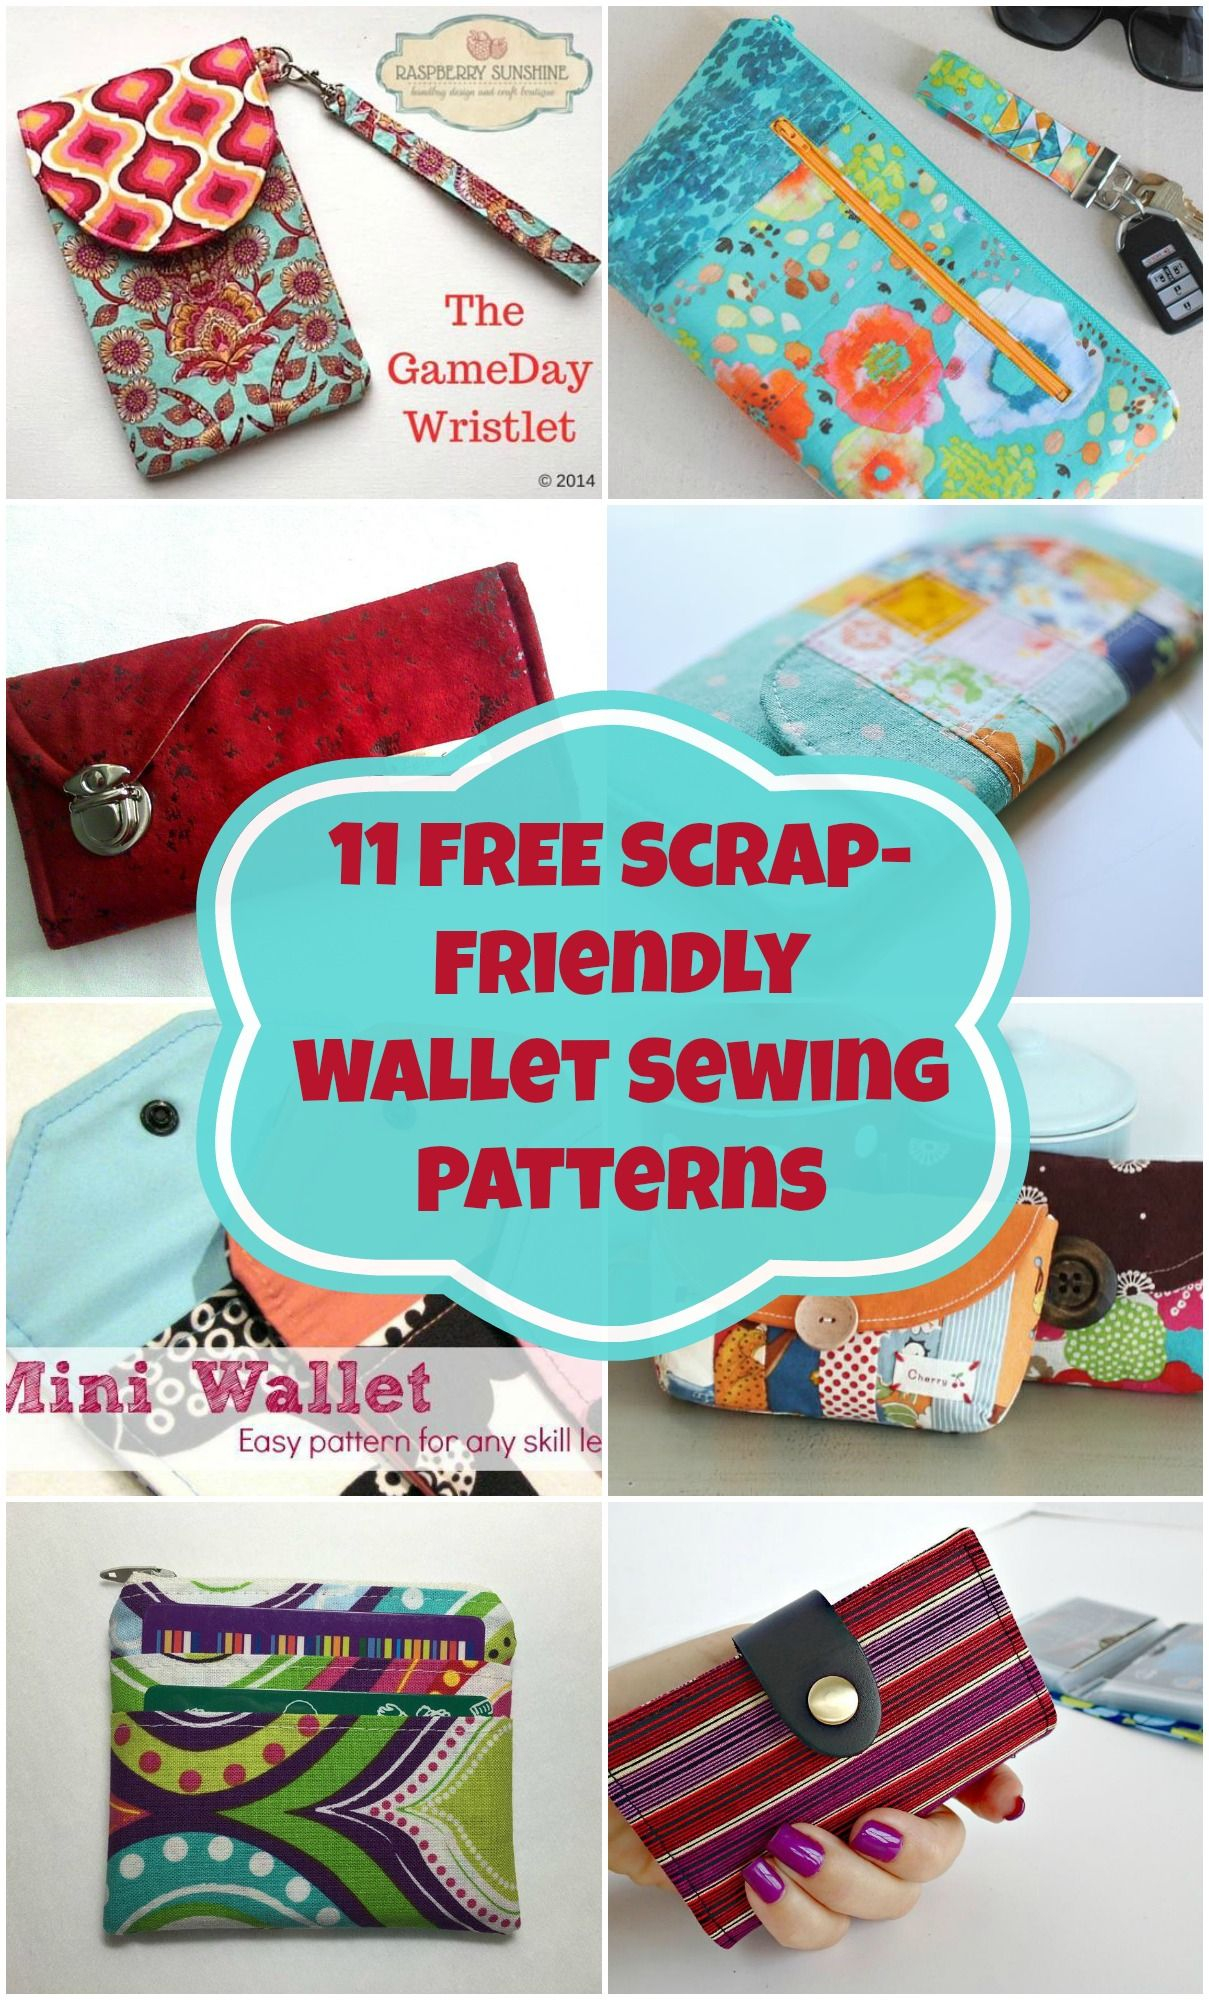 Sewing Scrap Projects Free Pattern 11 Free Wallet Sewing Patterns All Scrap Friendly Easy To Sew With